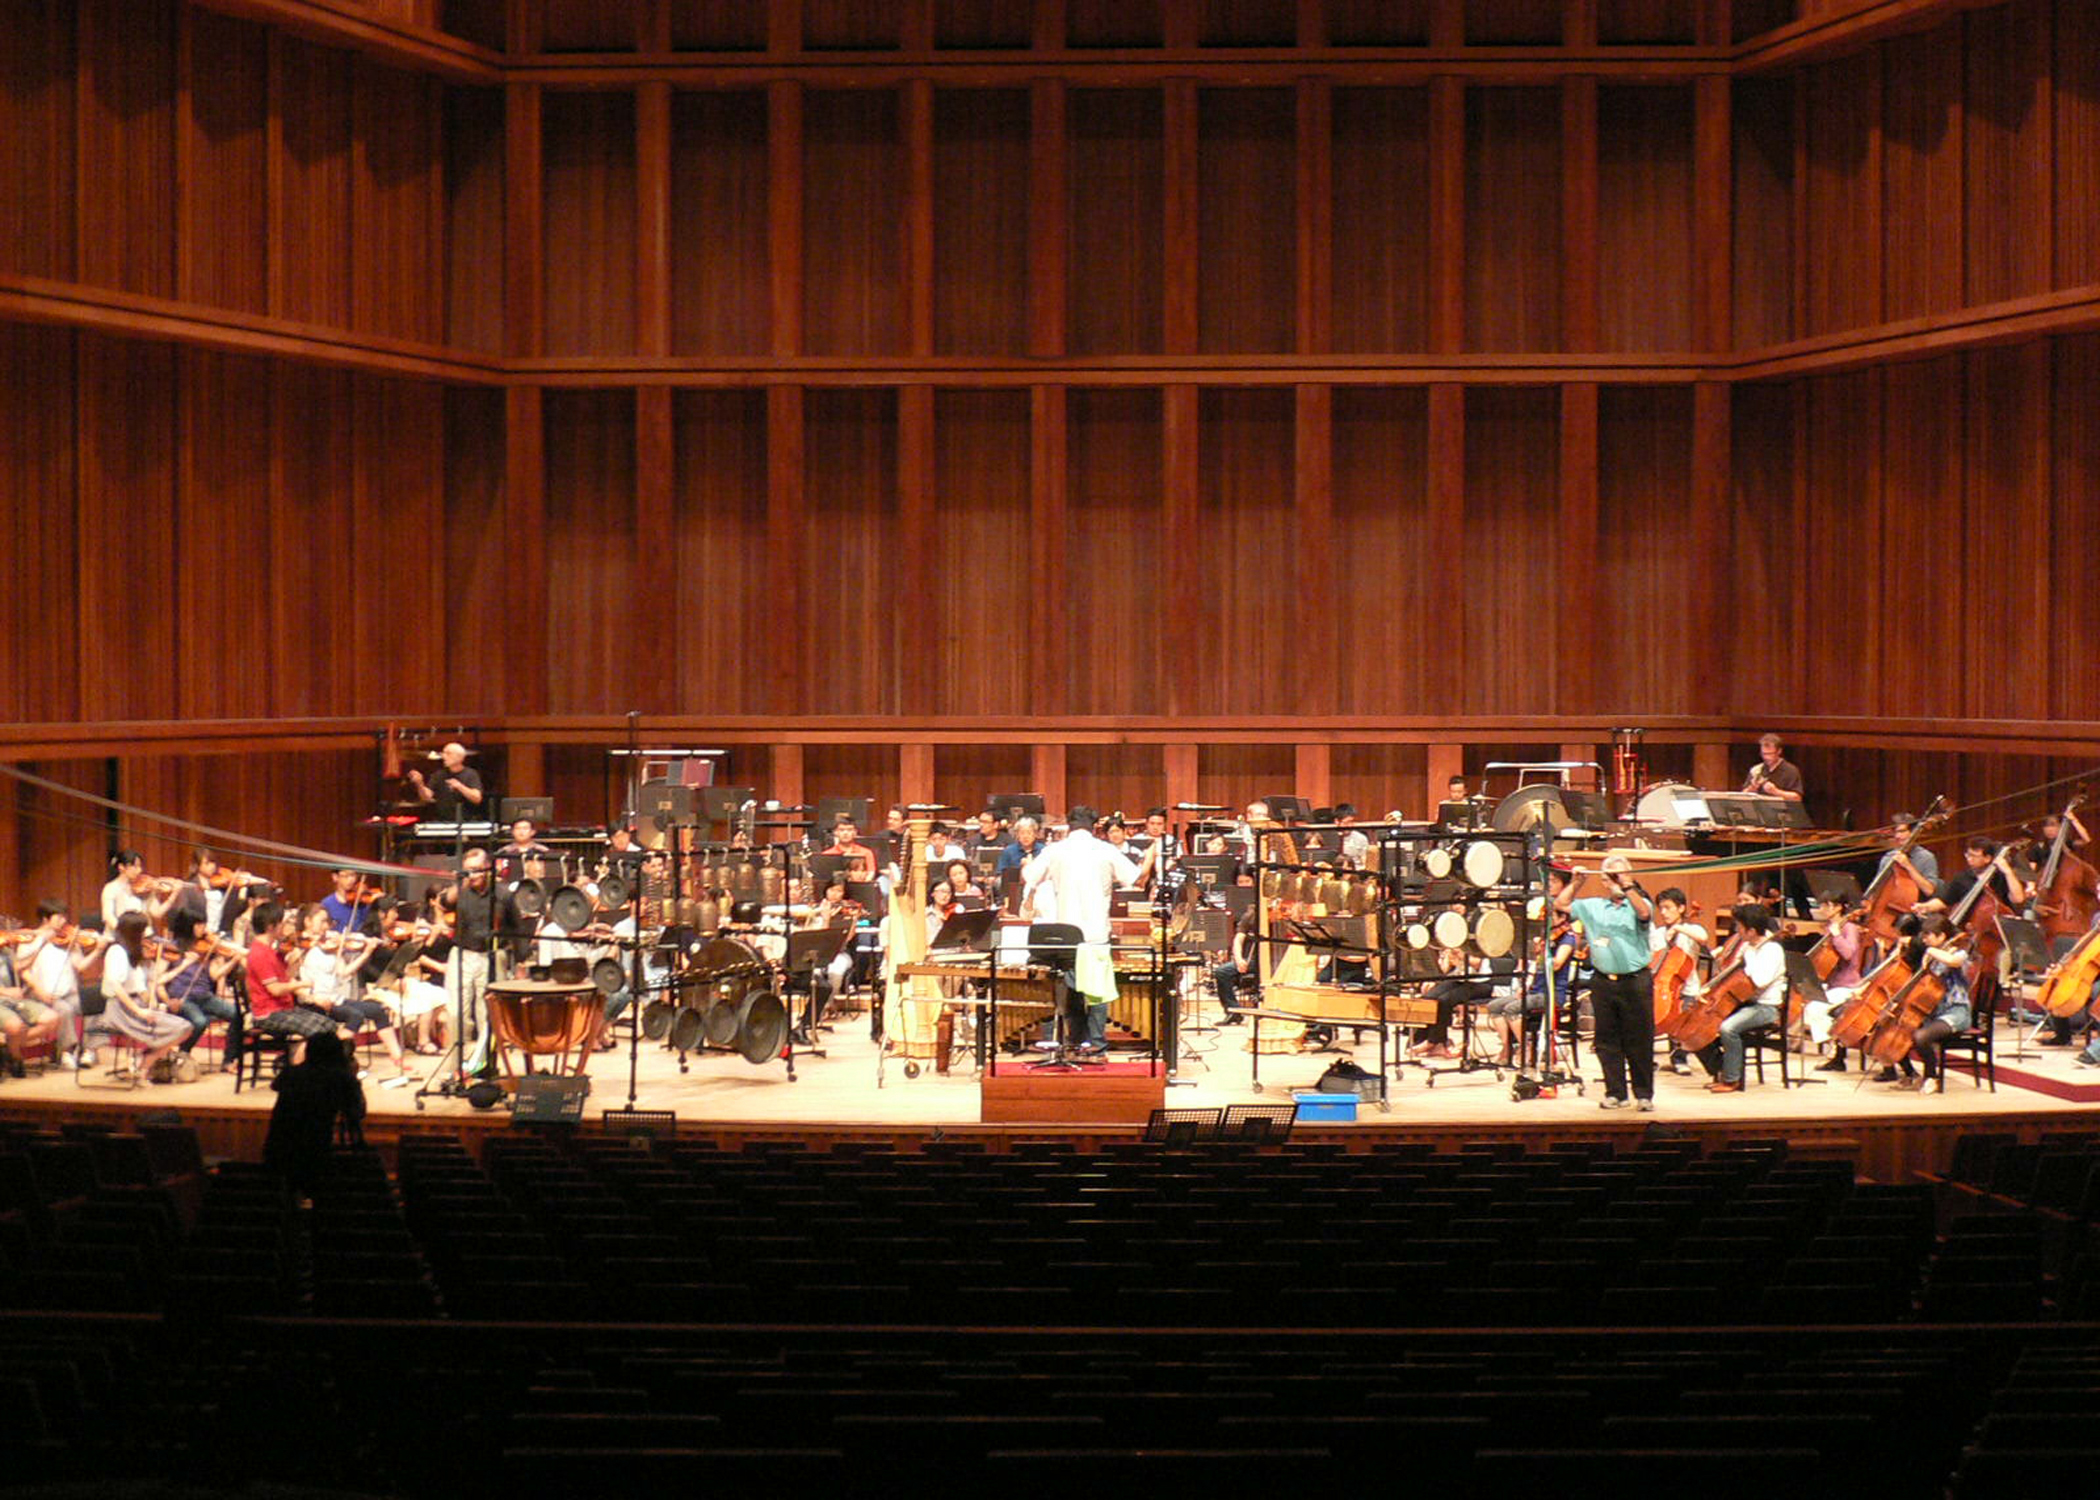 First rehearsal with the Hyogo Performing Arts Center Orchestra, conducted by Yutaka Sado on September 8, 2010